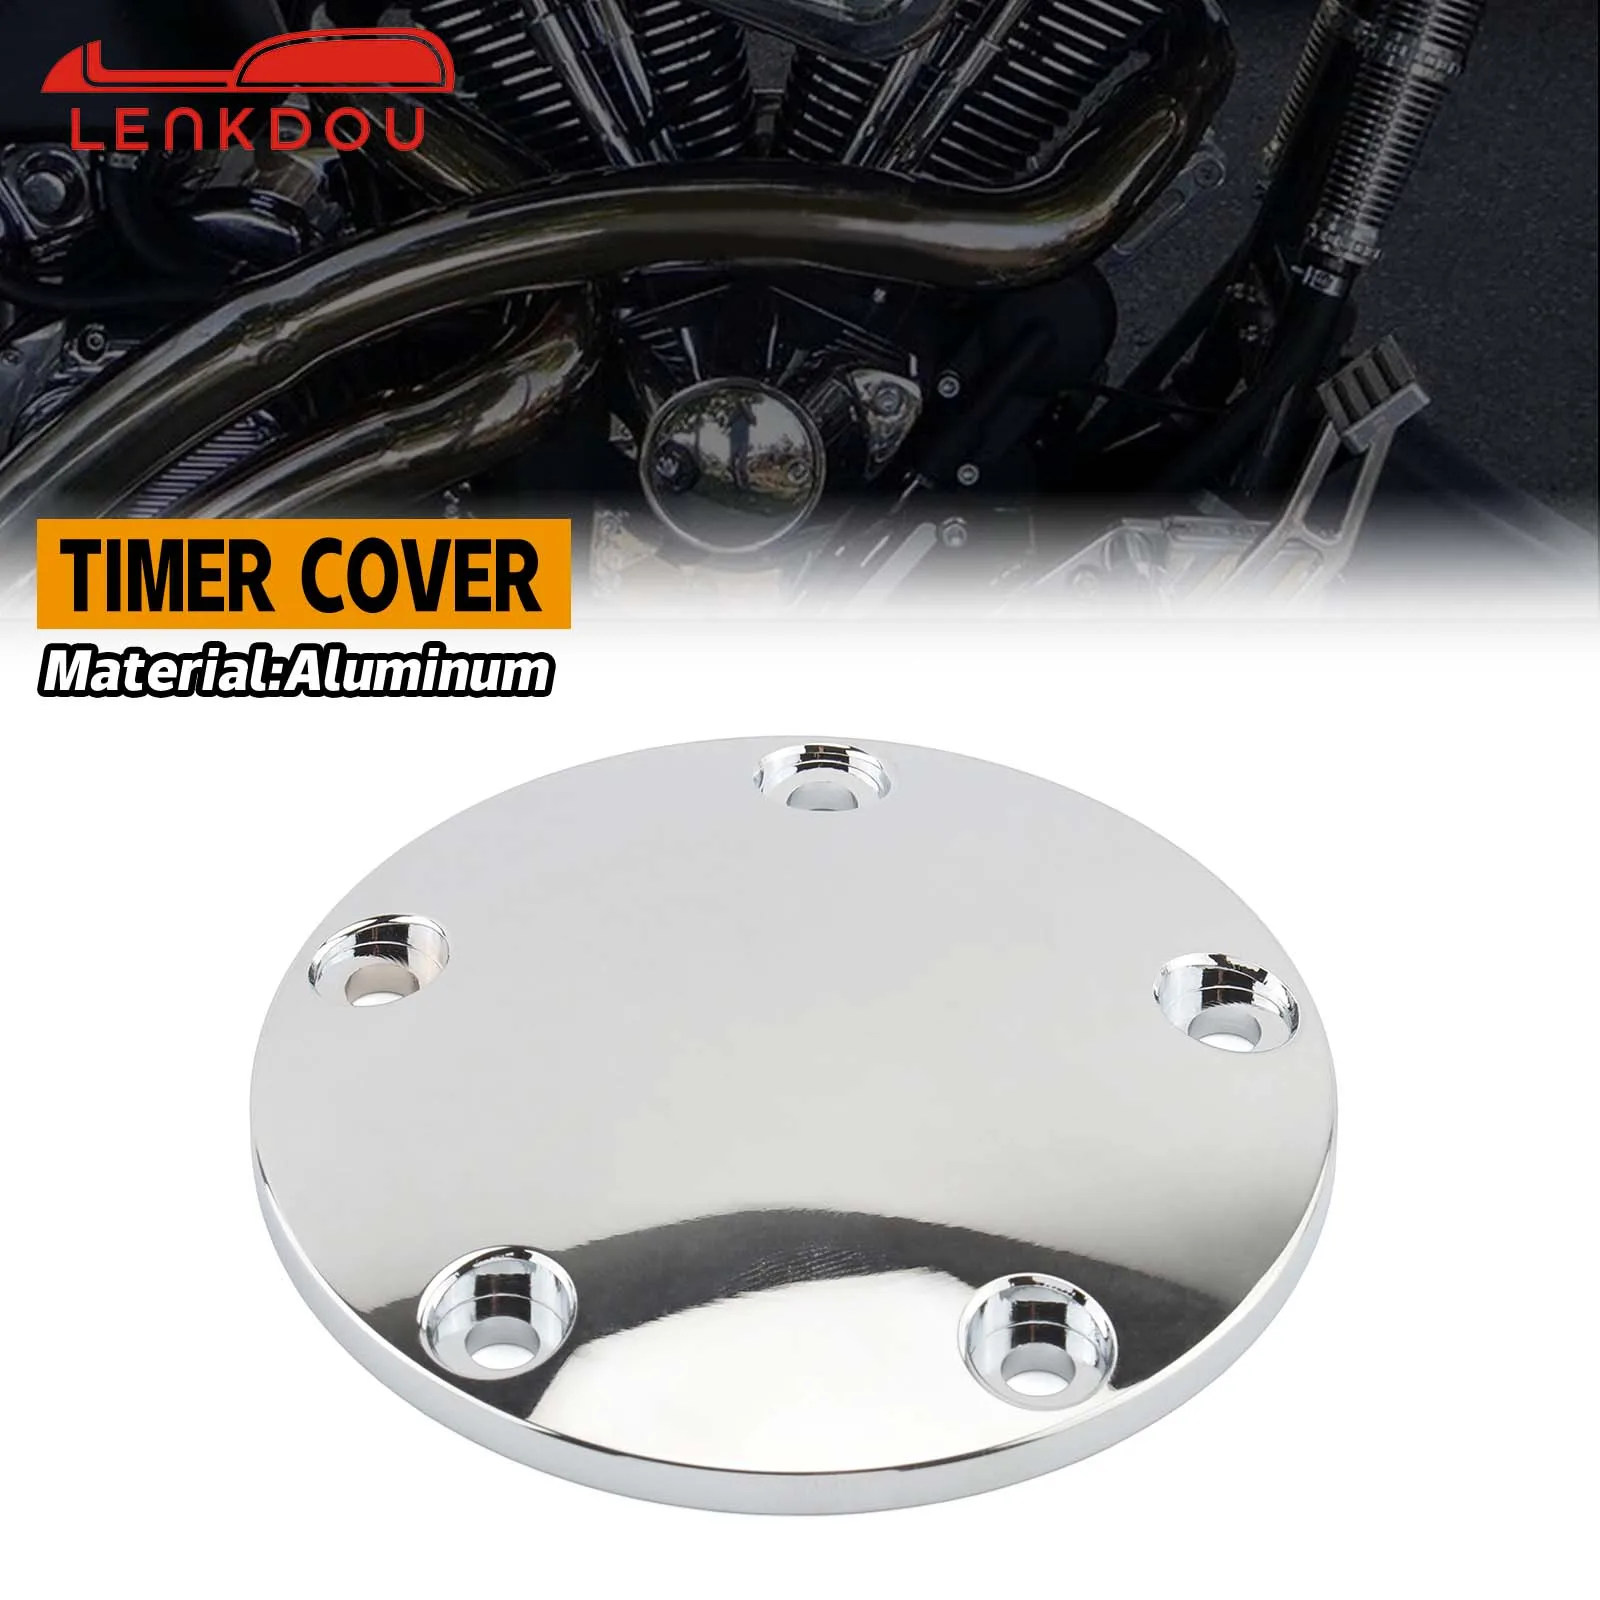 

Motorcycle Domed Timing Points Cover For Harley Twin Cam Touring Road Electra Glide Dyna Low Rider Softail Street Bob 1999-2017